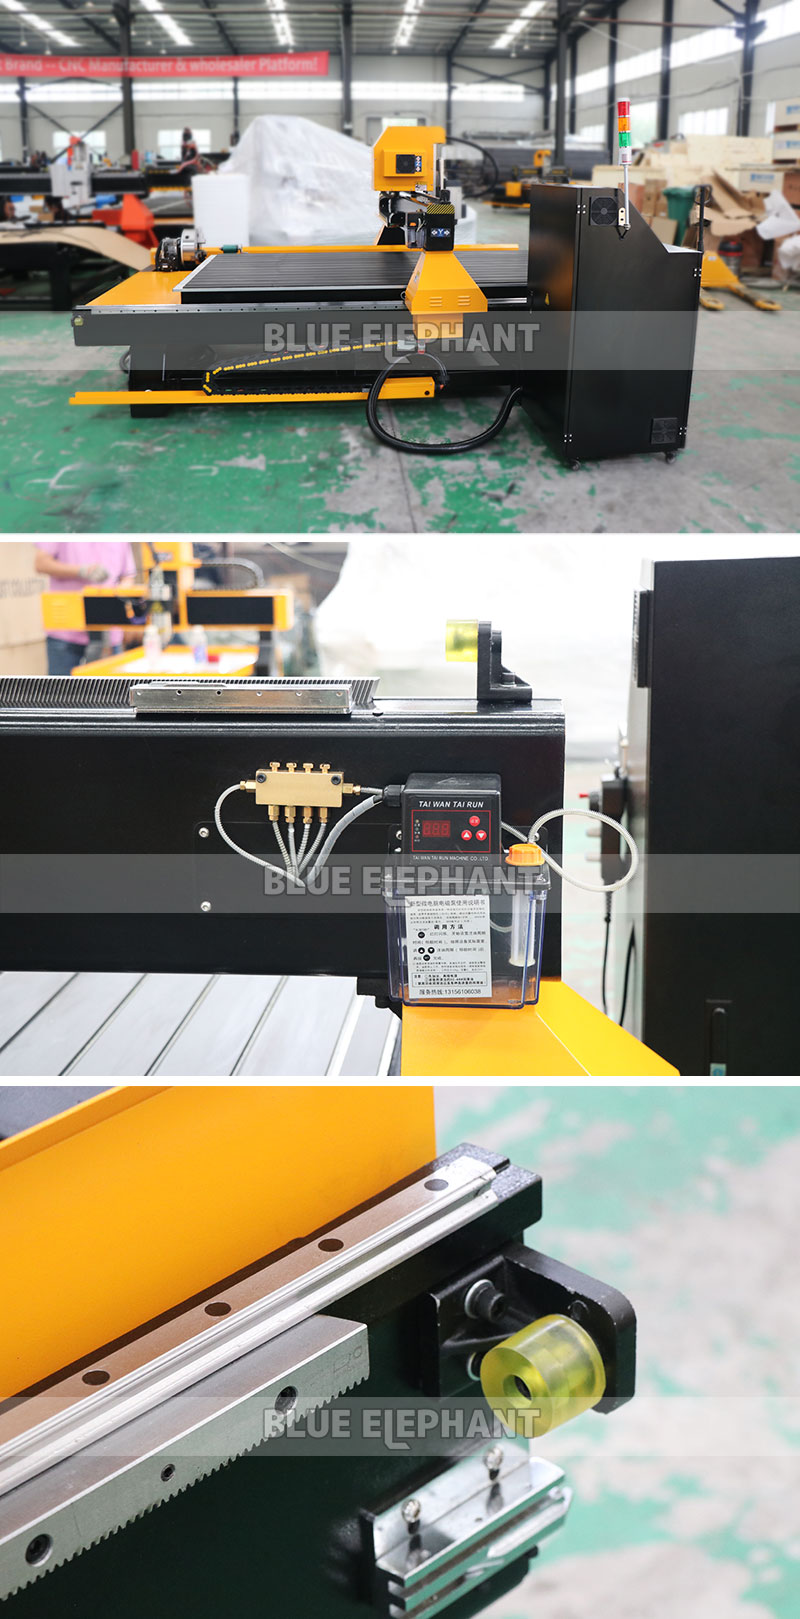 high precision 1325 wood cutting machine for Door&Cabinet Making